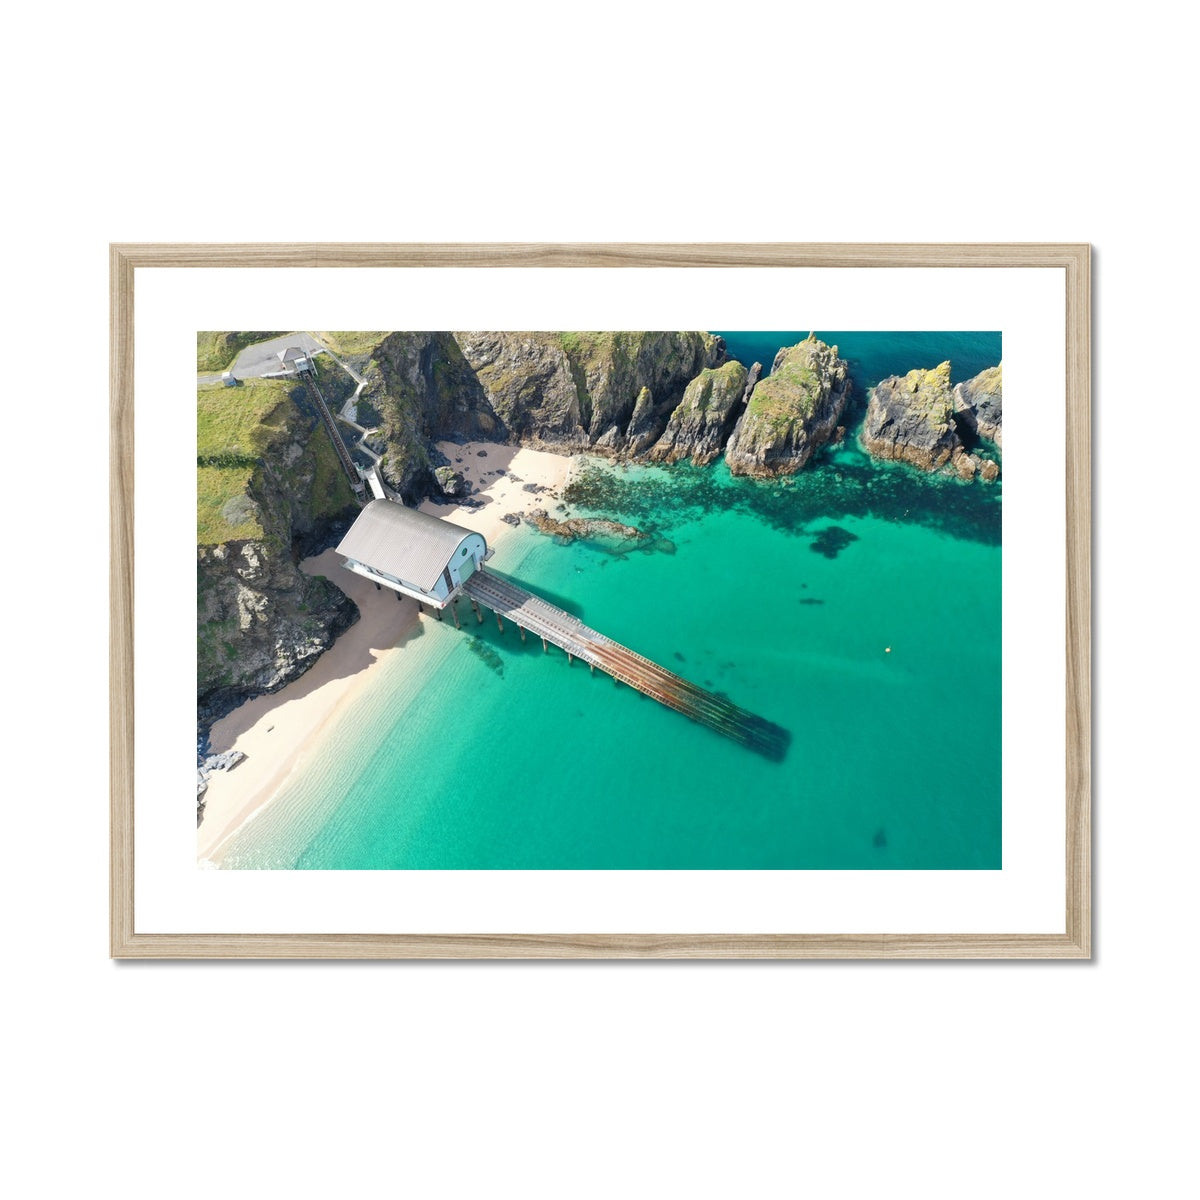 padstow lifeboat station wooden frame